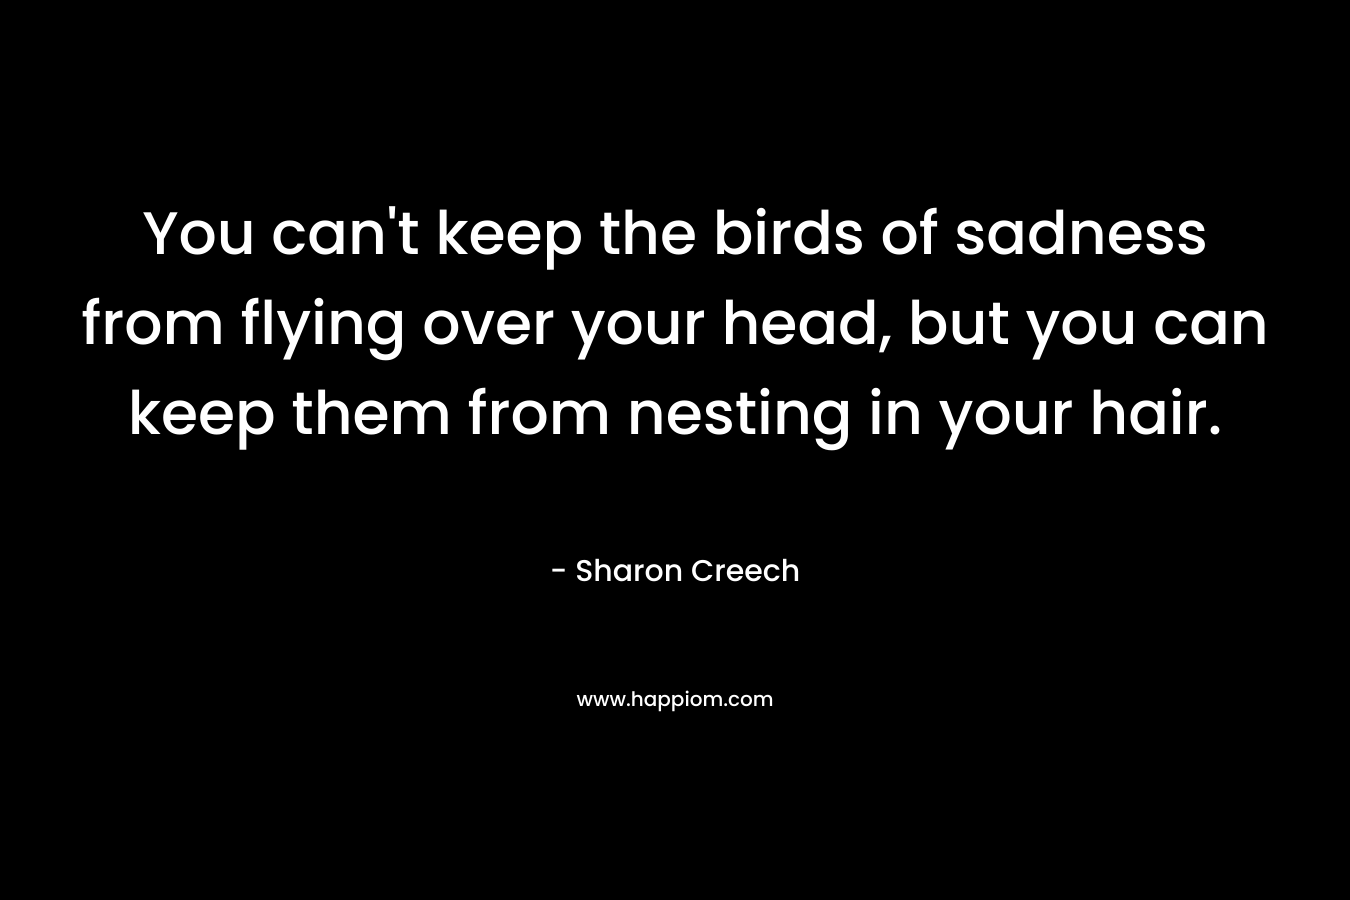 You can't keep the birds of sadness from flying over your head, but you can keep them from nesting in your hair.